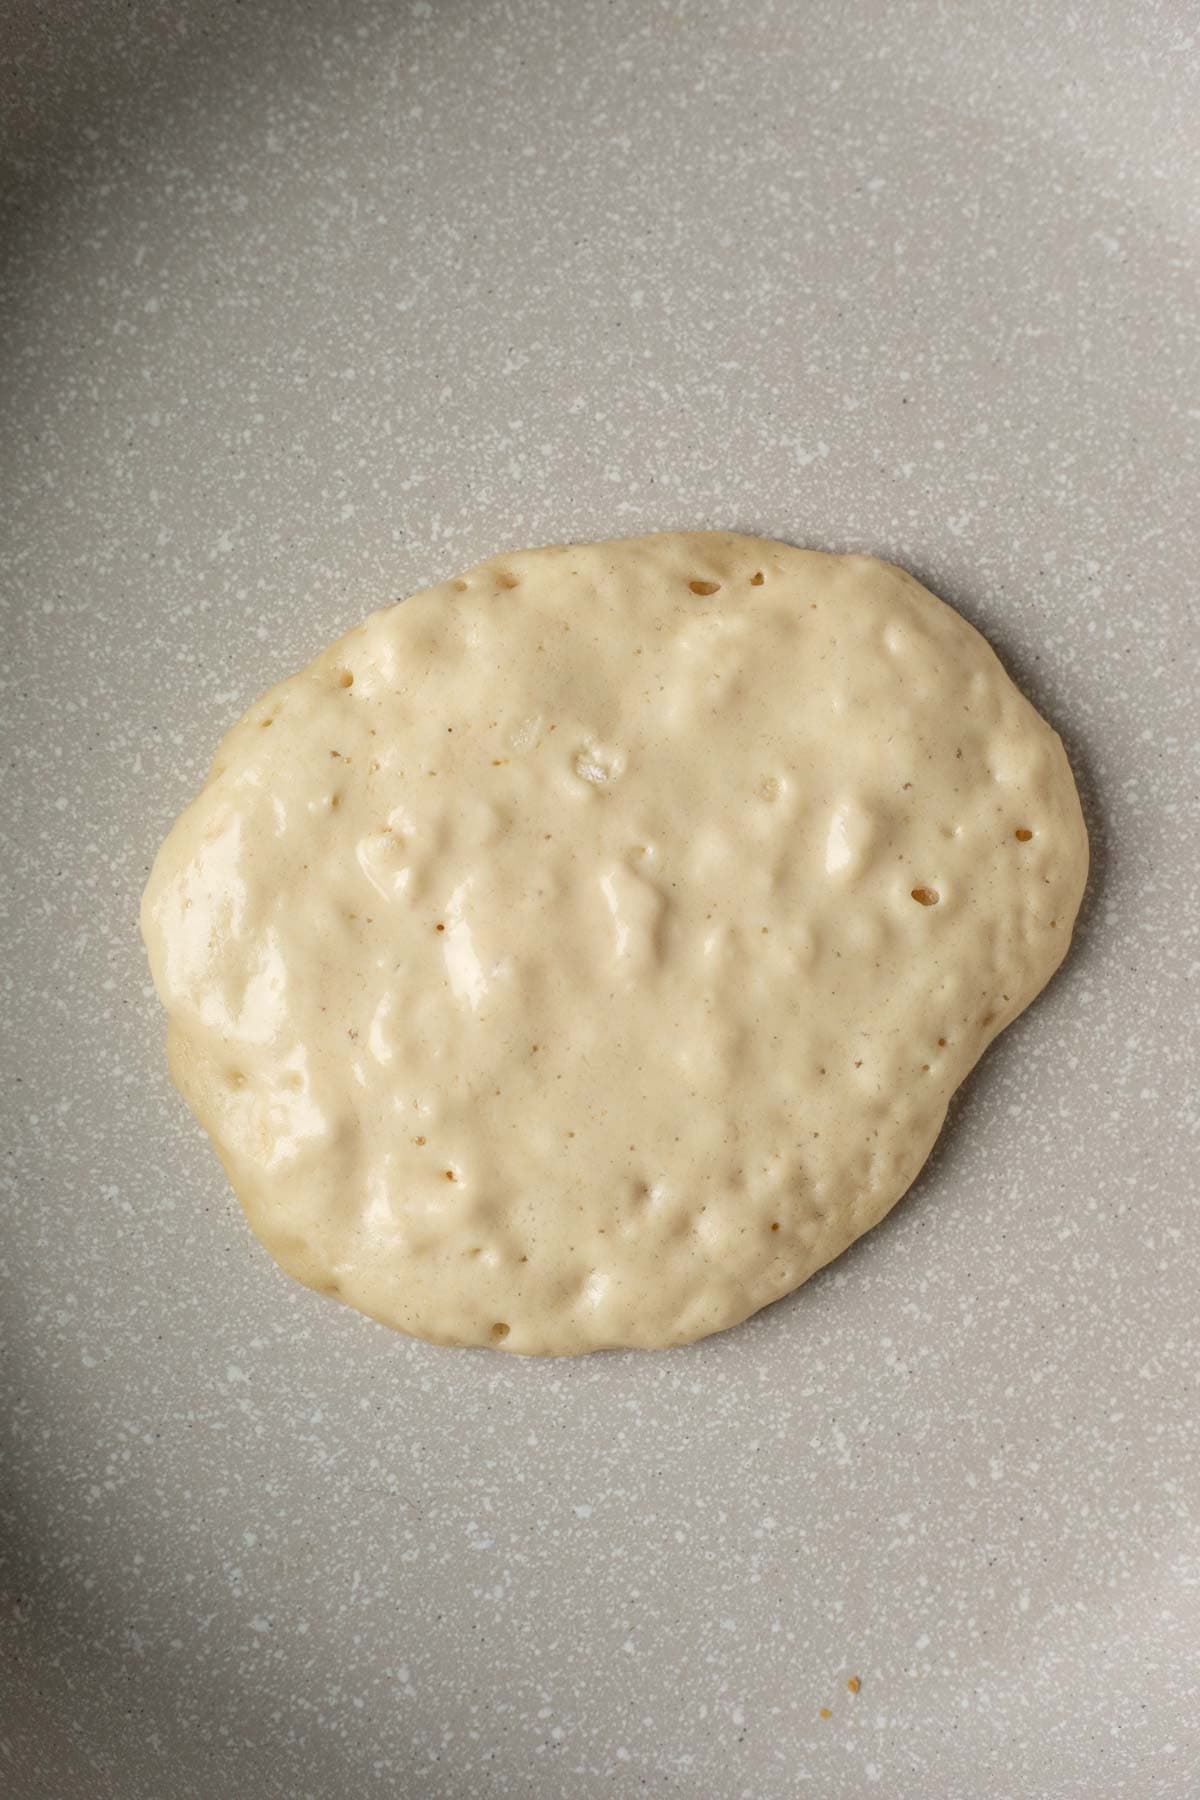 A vegan pancake with edges setting and bubbles forming on top.